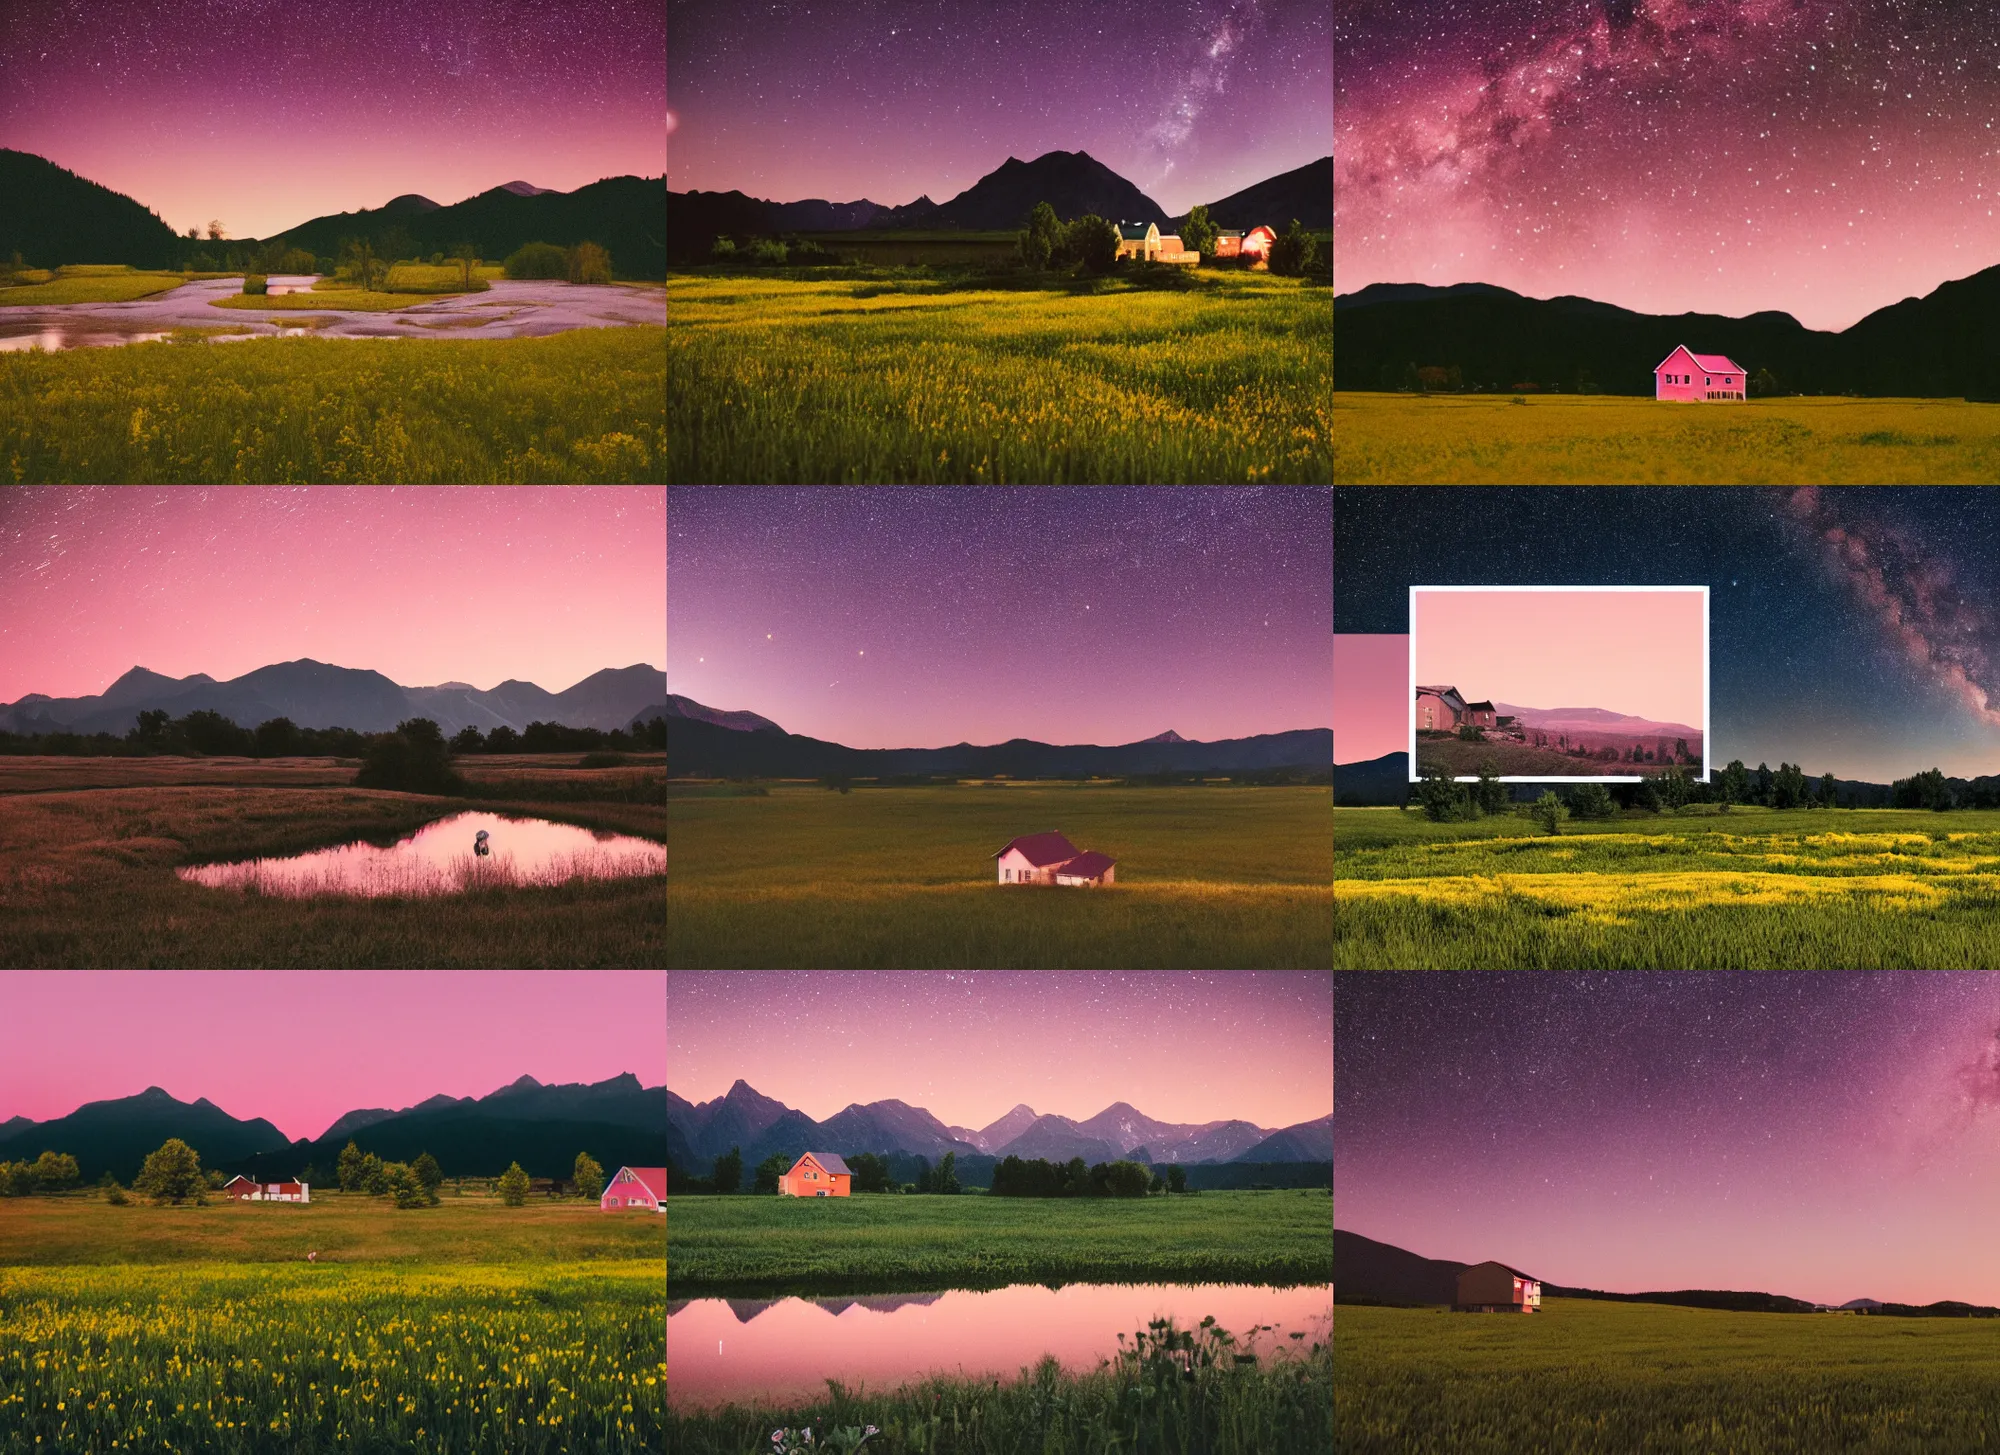 Prompt: still frame from a wes anderson movie of a meadow with a small pink farm house with a river and mountains, at dusk with the milky way stars, 1 6 mm f 1. 4 lens, nikkor, canon, sigma, award - winning landscape photography